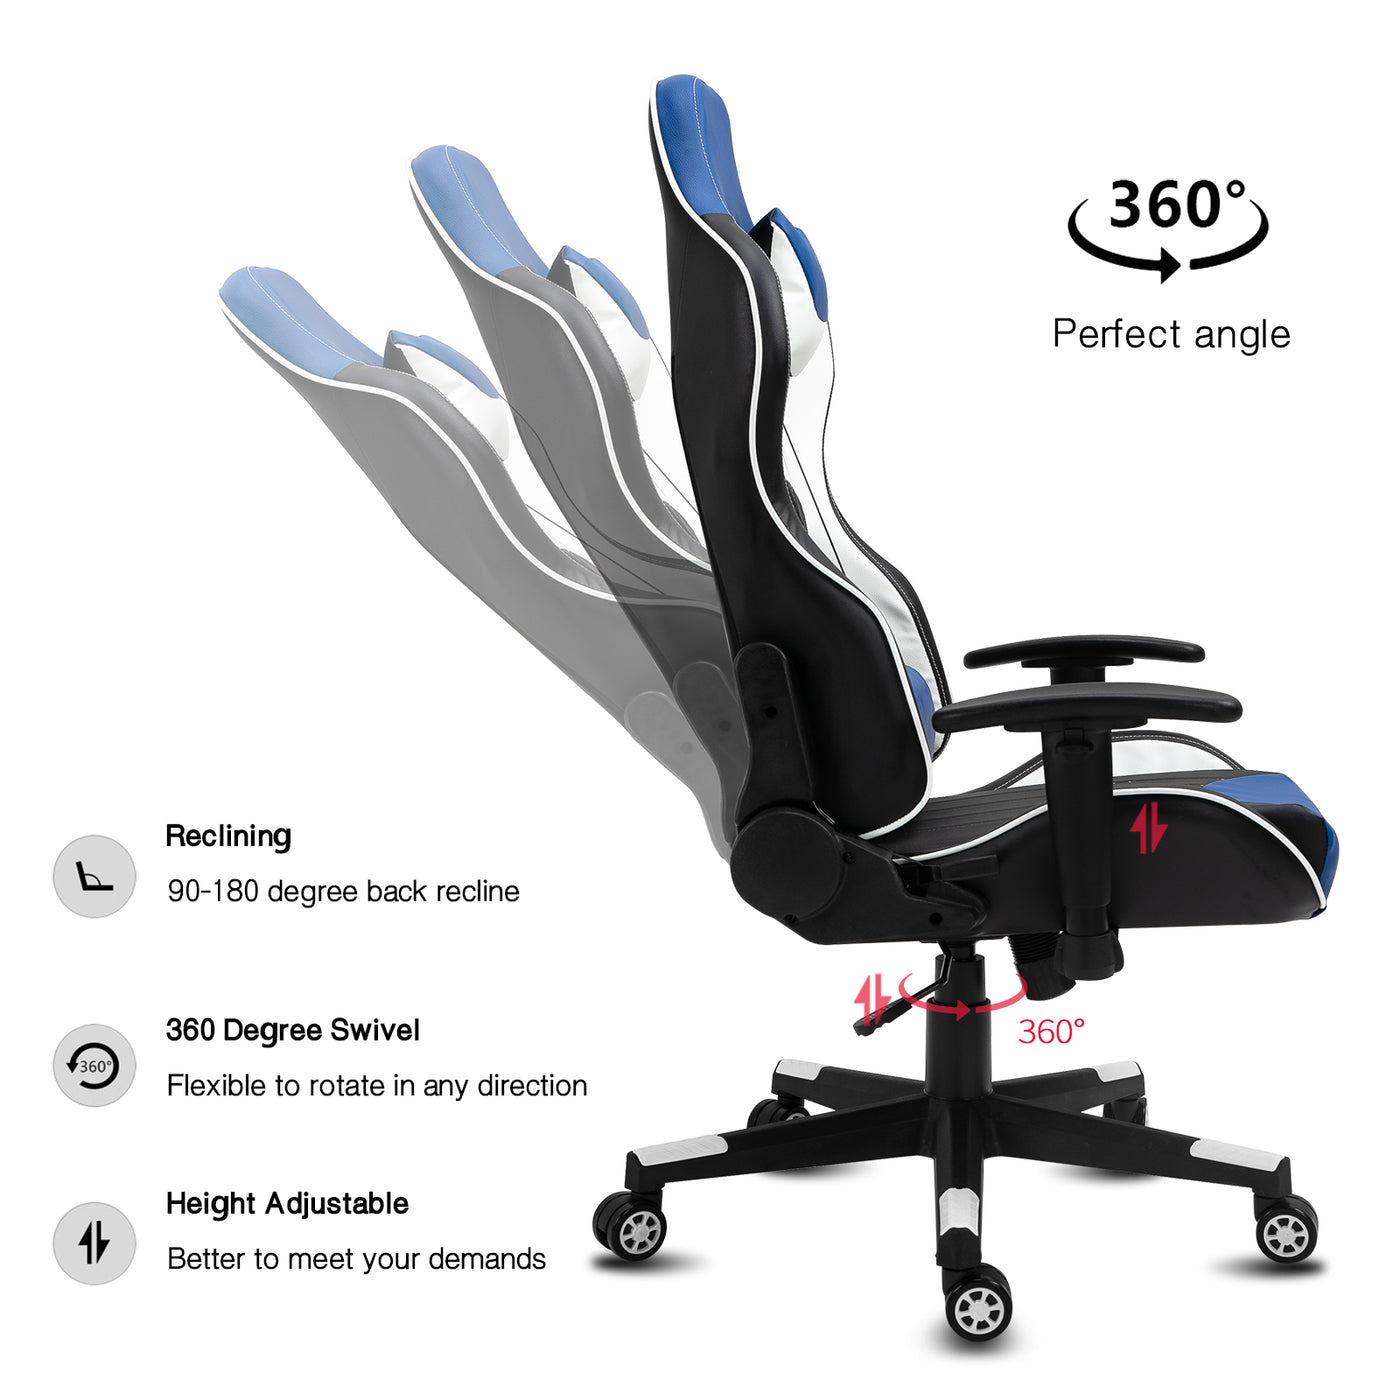 Ergonomic Gaming Chairs Leather Executive Computer Office Chairs Swivel Recliner